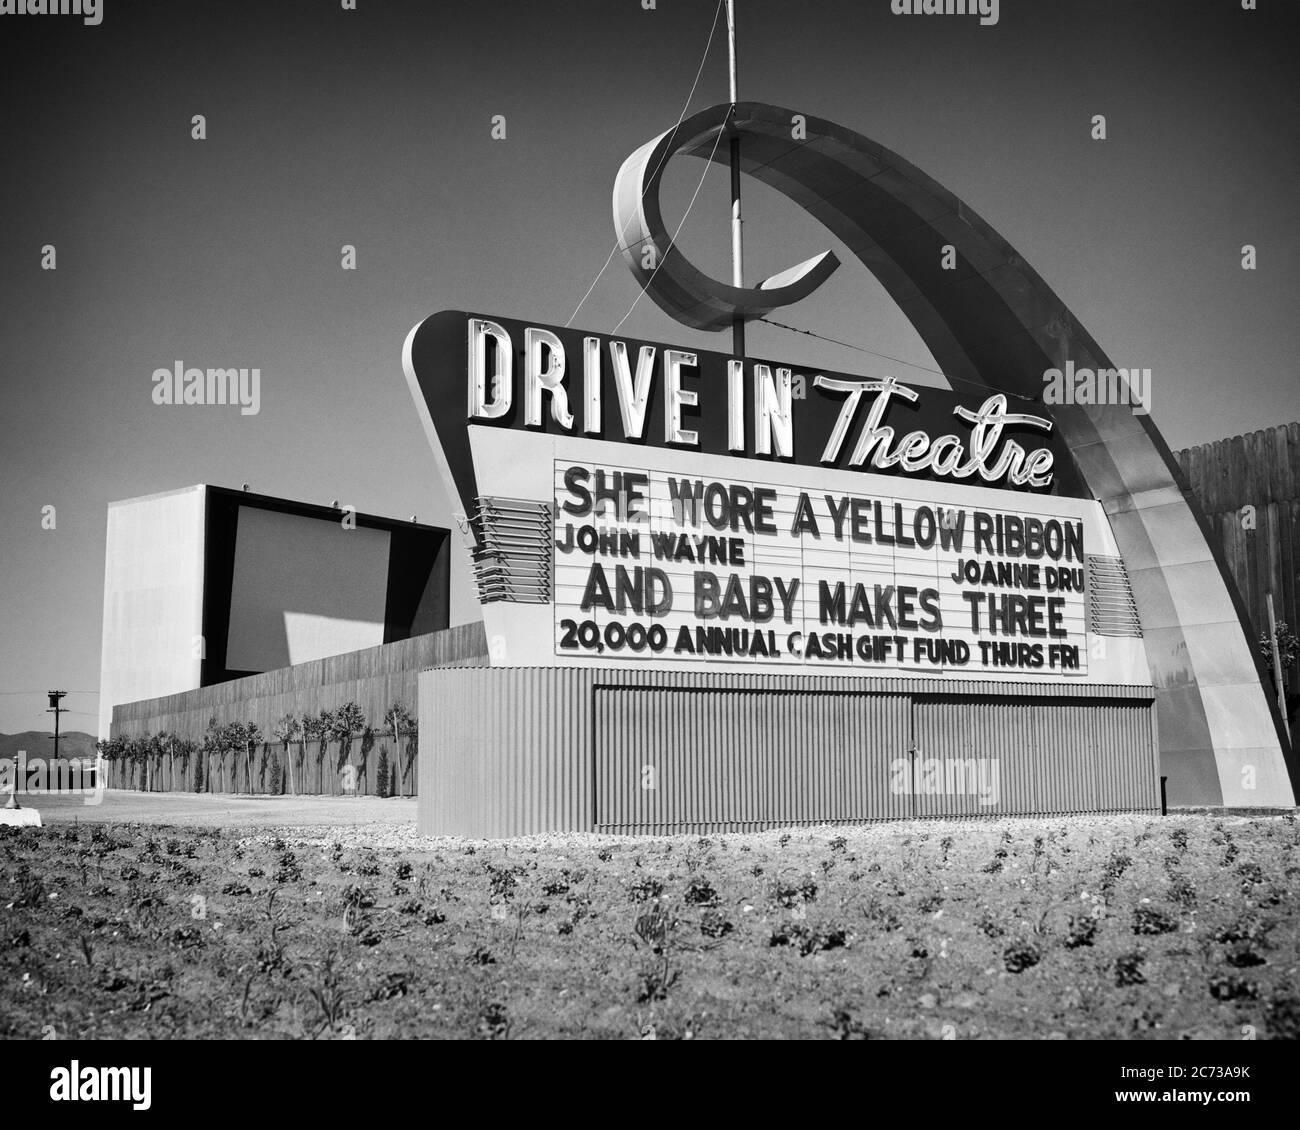 1940s 1950s DRIVE-IN THEATER MARQUEE SHOWING DOUBLE FEATURE OF 1949 MOVIES SHE WORE A YELLOW RIBBON AND BABY MAKES THREE - s1318 PRC002 HARS LIFESTYLE HISTORY JOHN SHOWING RURAL TRANSPORT UNITED STATES COPY SPACE ICON MARQUEE UNITED STATES OF AMERICA AUTOMOBILE ENTERTAINMENT AMERICANA TRANSPORTATION B&W MOVIES COMING WIDE ANGLE ACTIVITY DREAMS NEON ADVENTURE ARCHIVAL AND AUTOS MOVING PICTURE EXTERIOR LOW ANGLE RECREATION IN OF ATTRACTION AUTOMOTIVE MOTORING FAD CONCEPTUAL NEON LIGHT AUTOMOBILES ESCAPE POPULAR STYLISH WAYNE JOHN WAYNE THING DRIVE IN DRIVE-IN RELAXATION TWILIGHT ART DECO Stock Photo